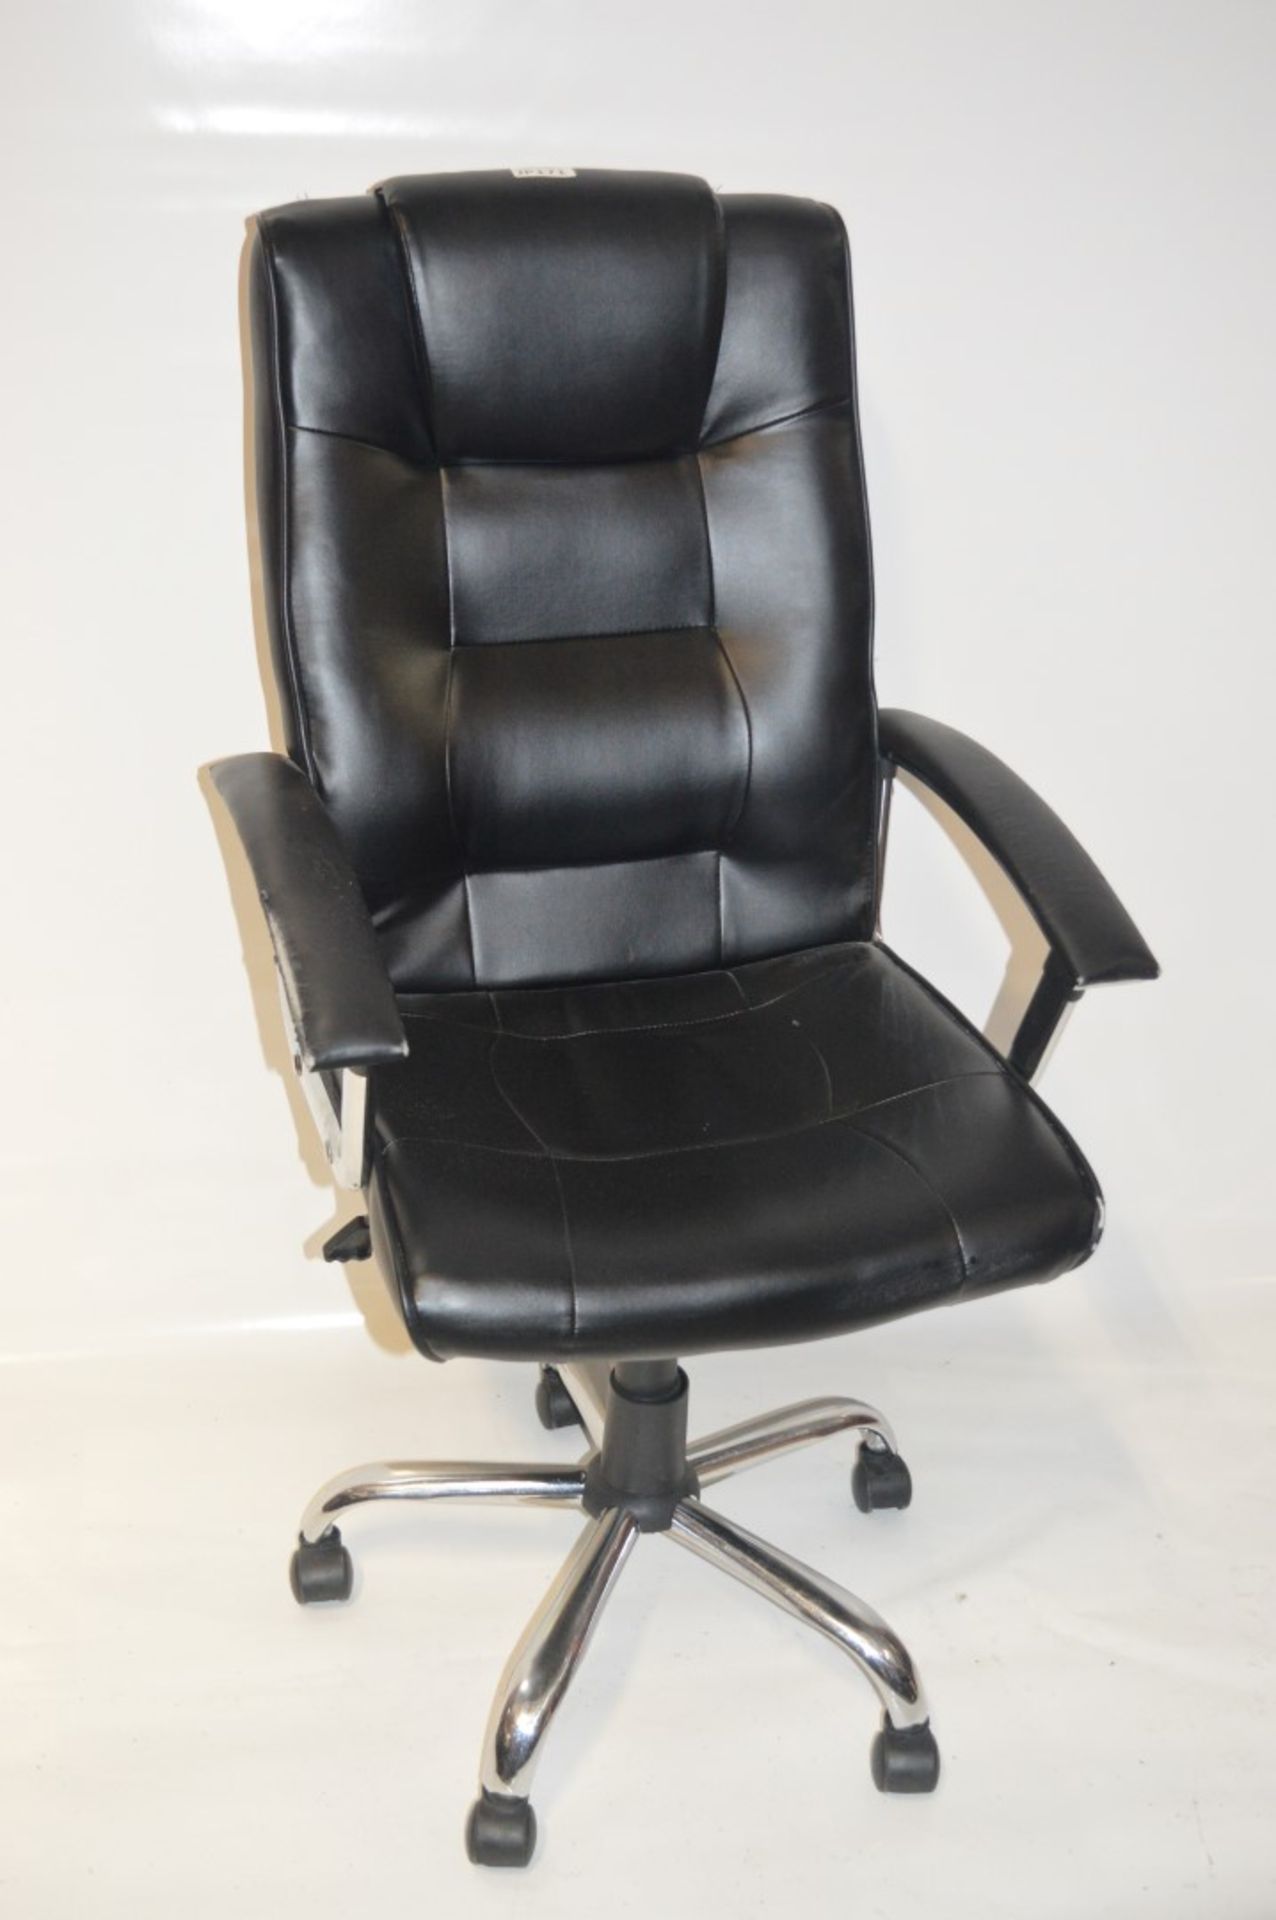 1 x Executives Office Chair - Black PU Leather and Chrome Finish - Features Swivel Height Adjustable